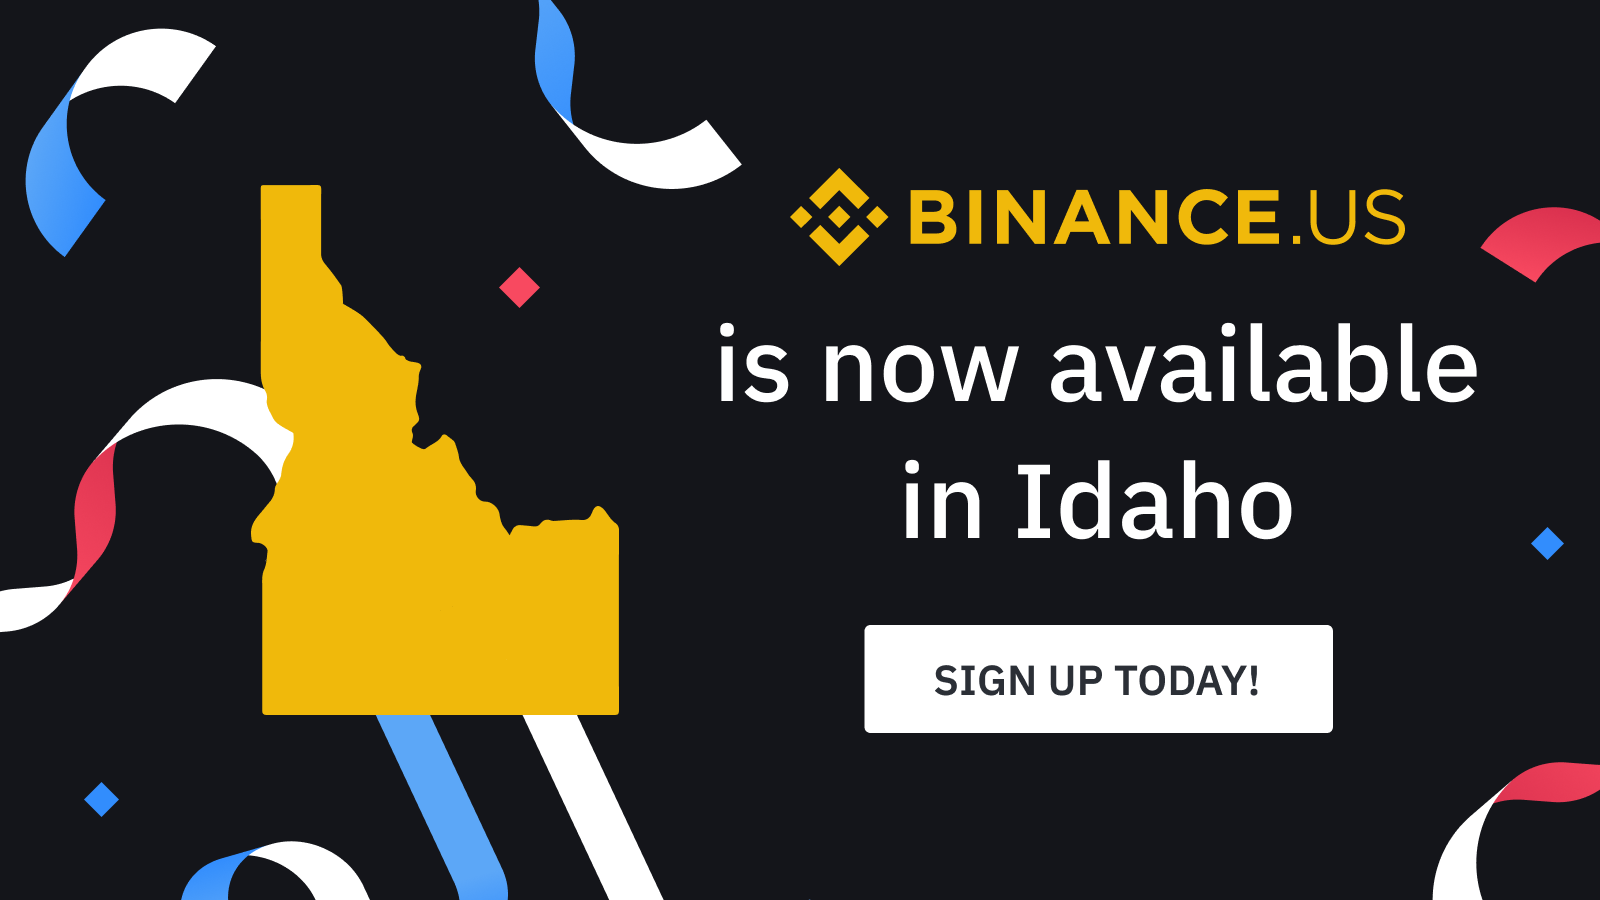 Binance.US Officially Launches in Idaho | Register Now